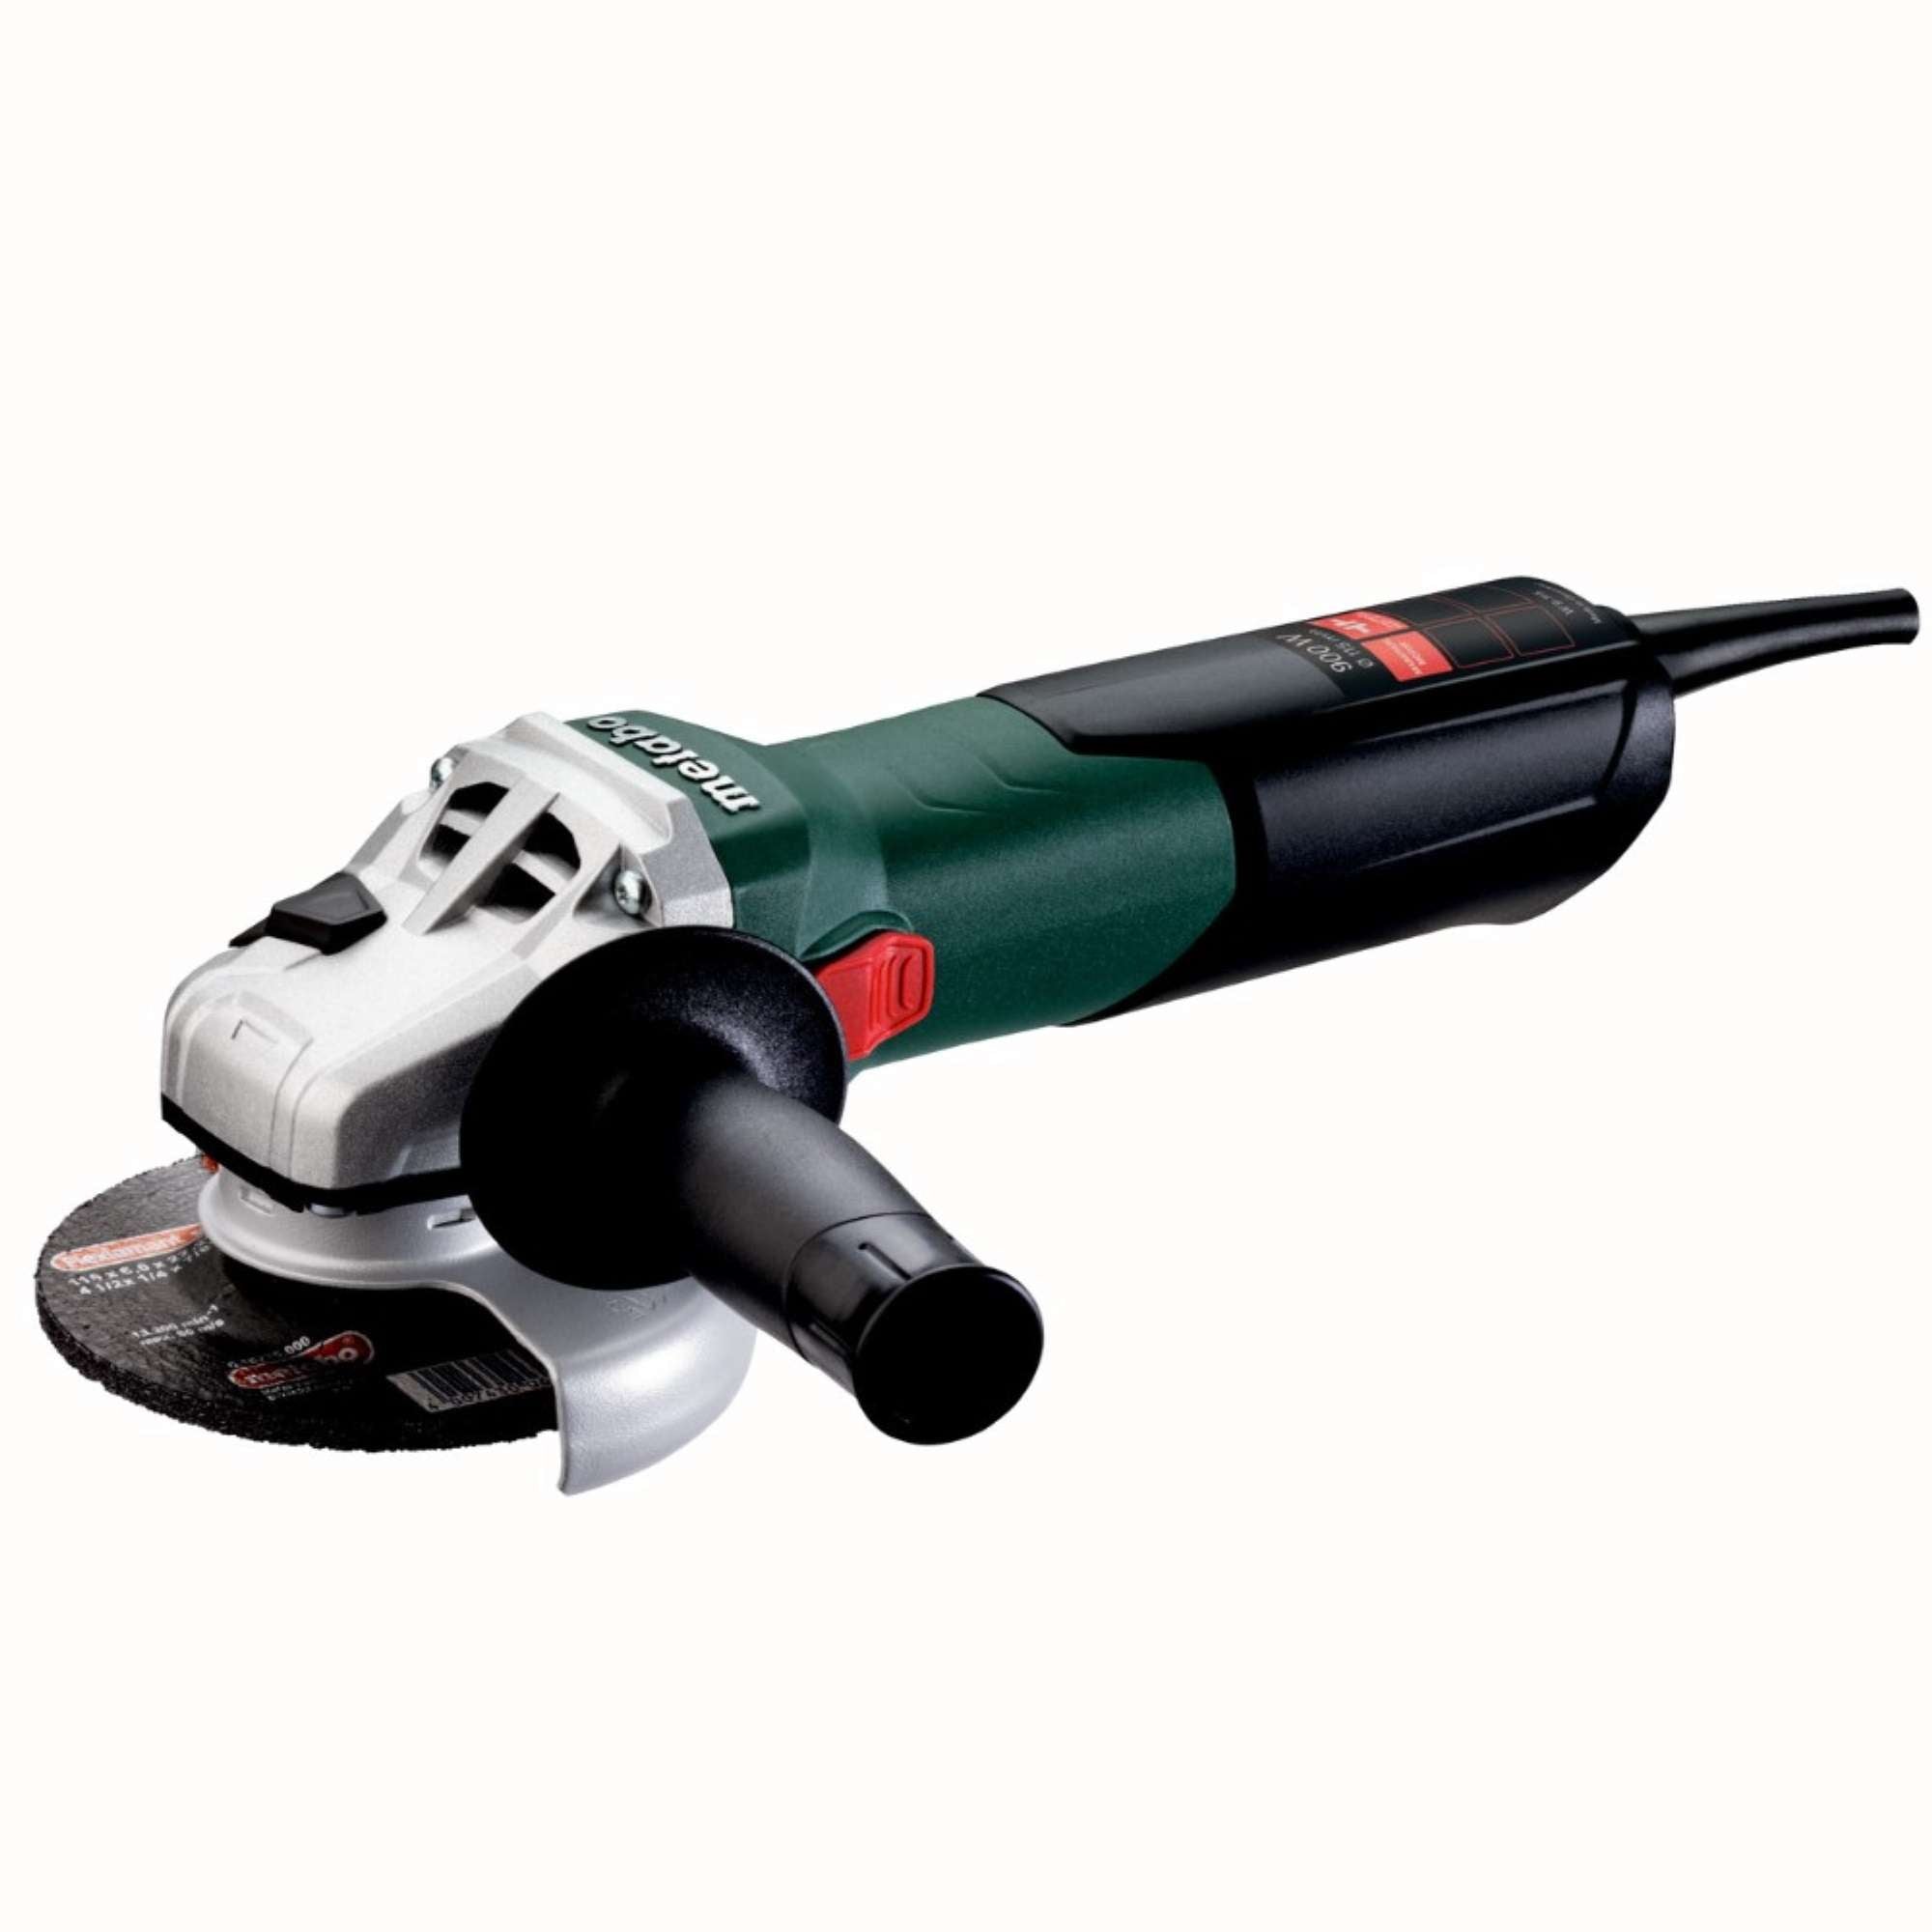 Angle grinder W 9-115 900W D.115 - Metabo 6.00354